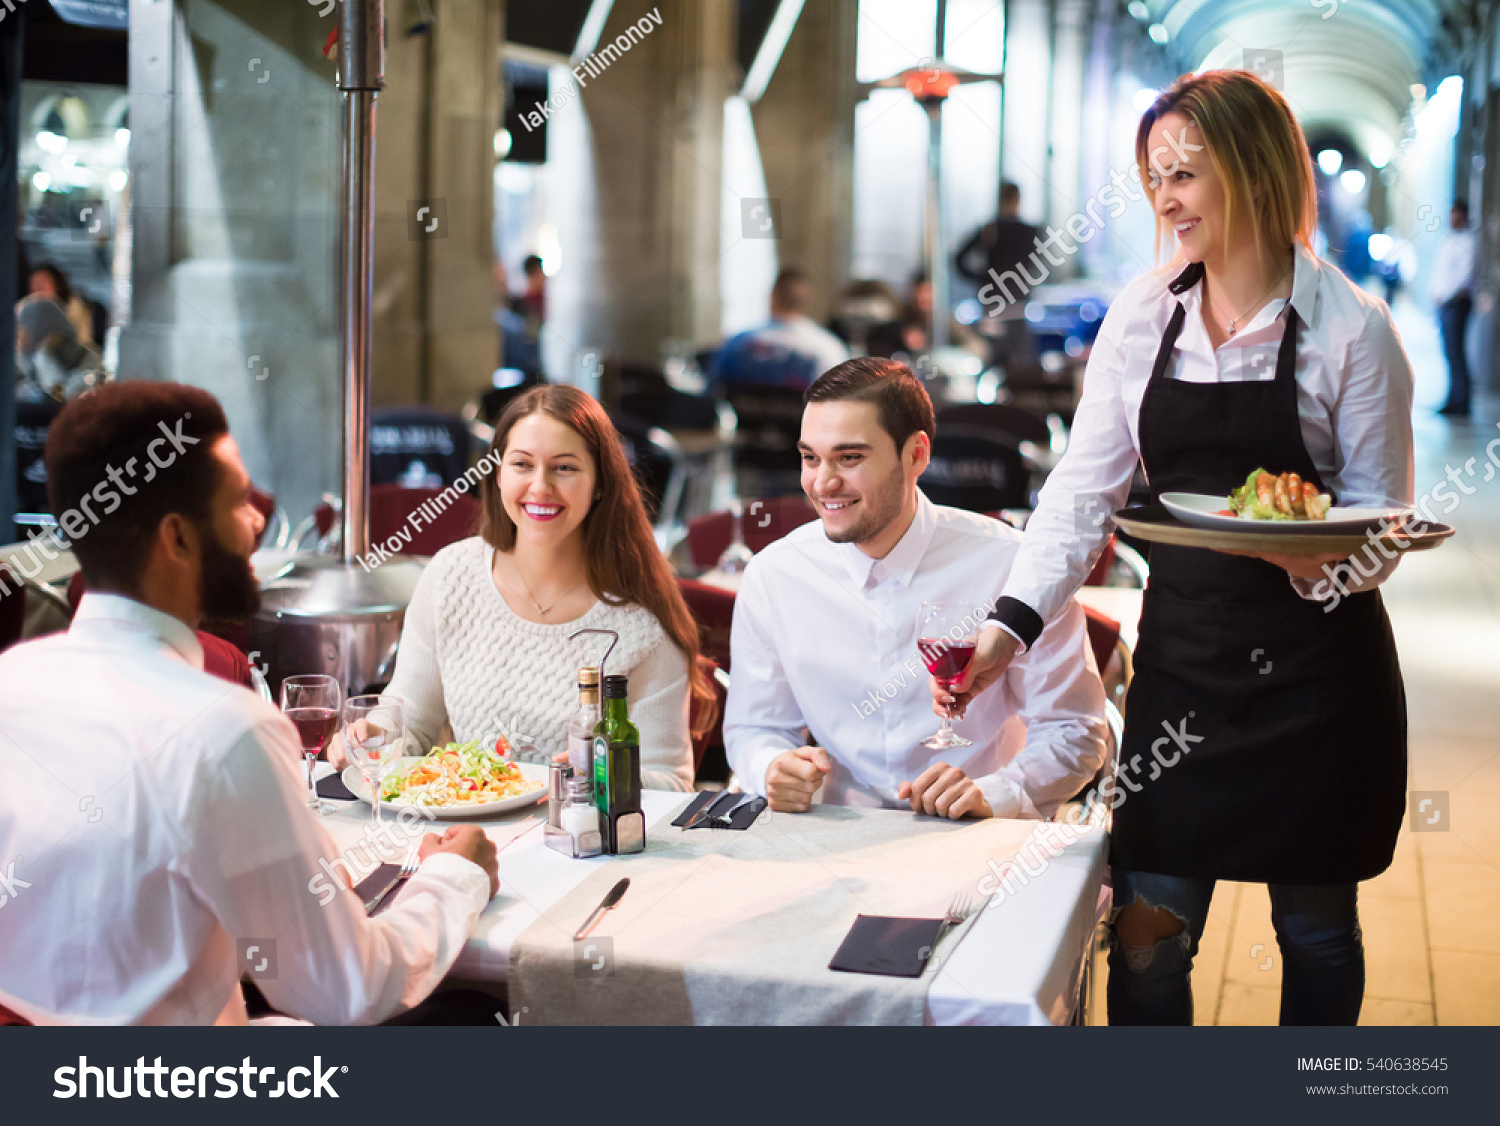 Portrait of smiling adult friends in outdoors restaurant and smiling waitress.  Focus on blonde girl #540638545